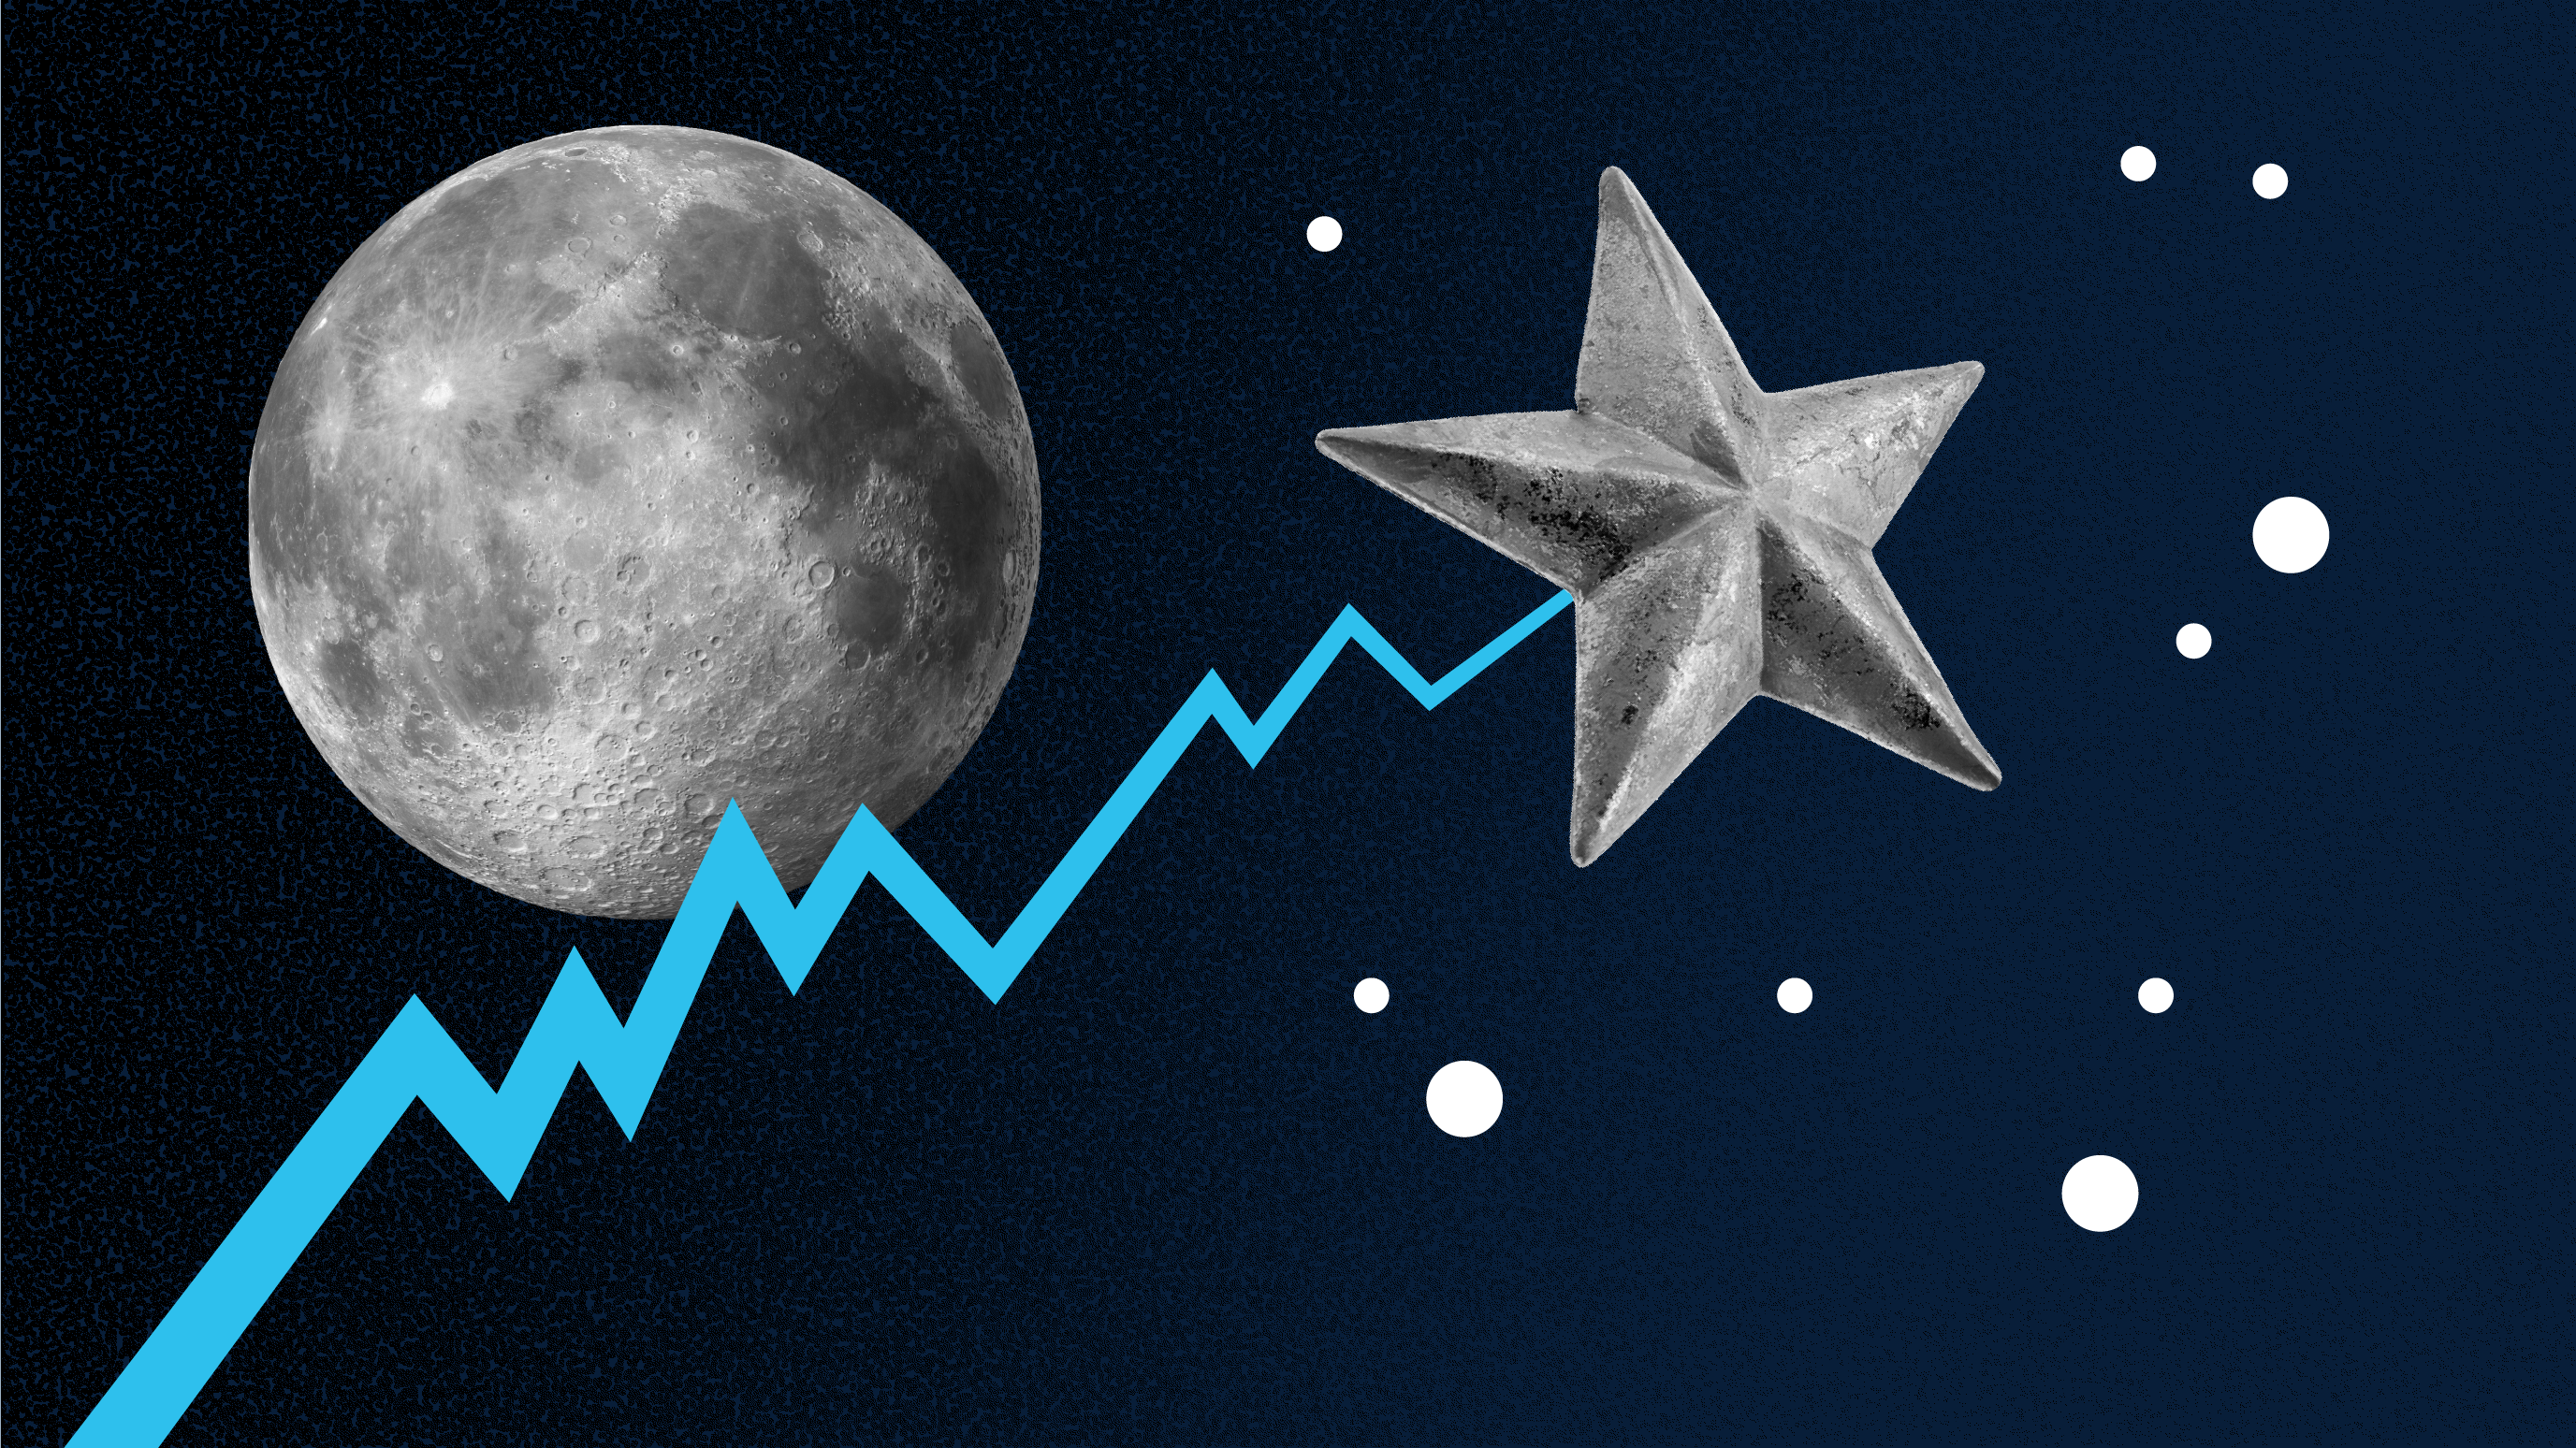 An illustration of a telescope is shown pointing towards the sky where the path of a shooting star can be seen, alluding to the concept of short term vs. long term investing.